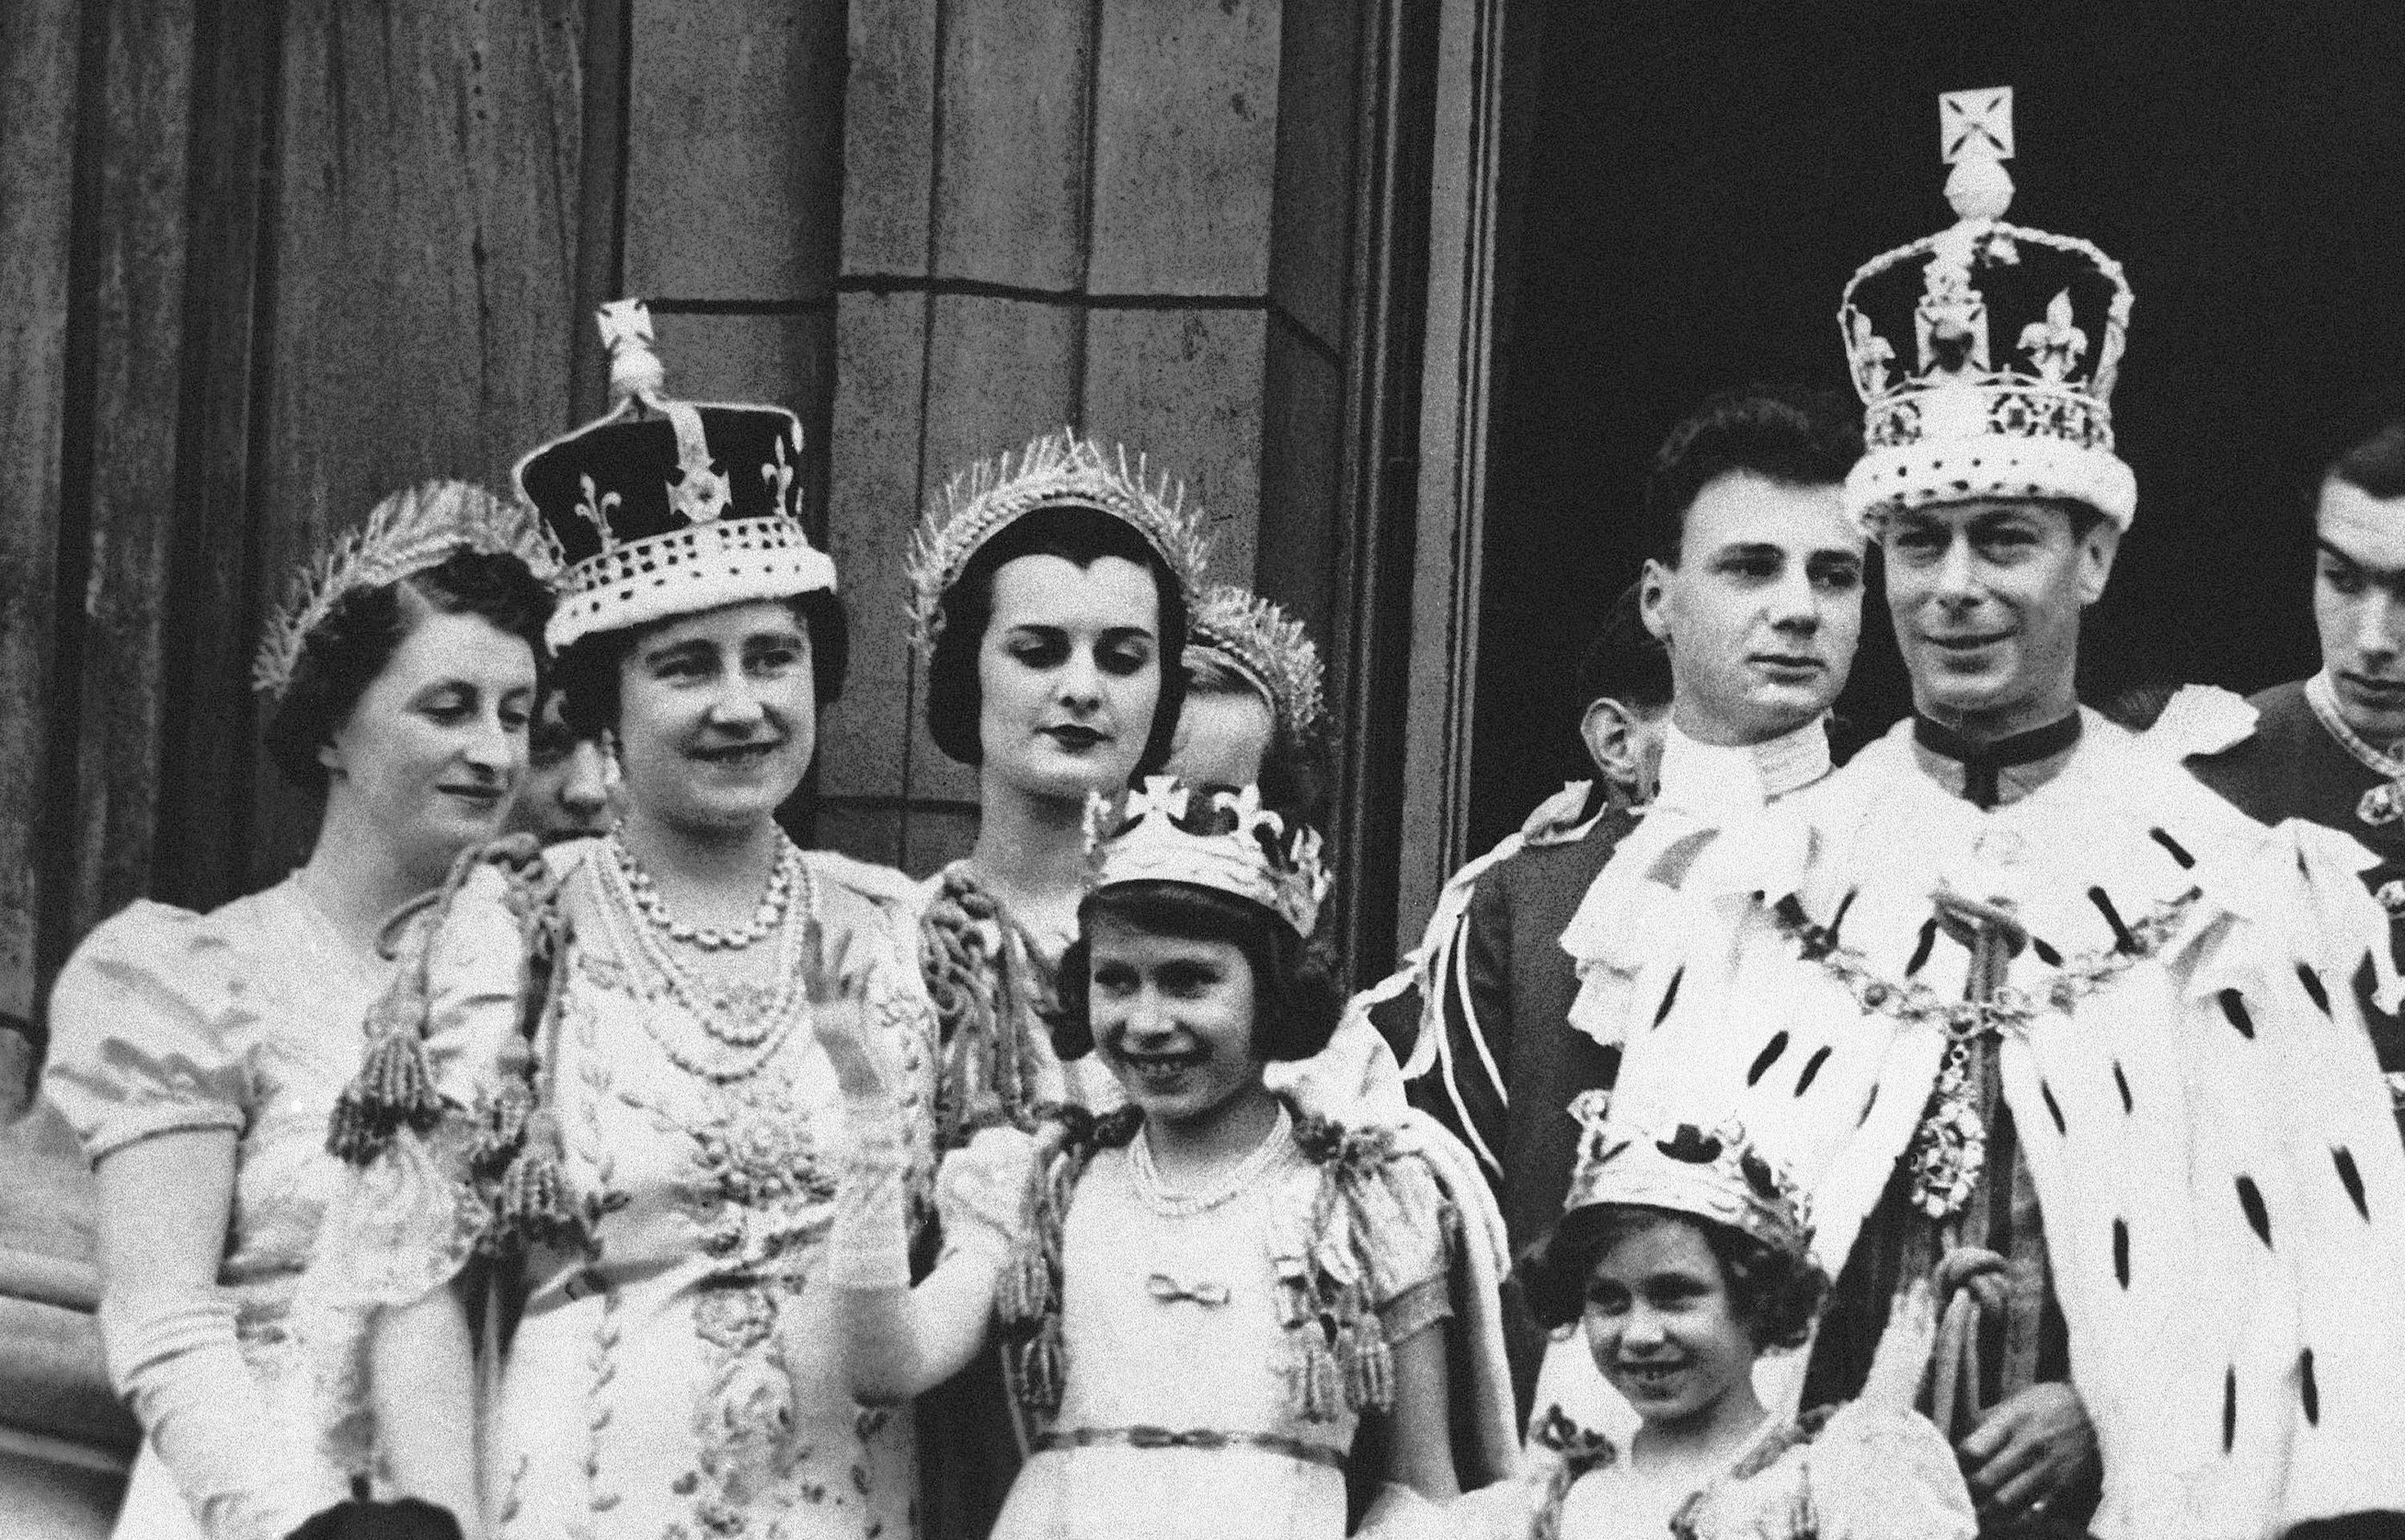 Queen Elizabeth II To Mark 70-Year Reign at Place of Father's Death